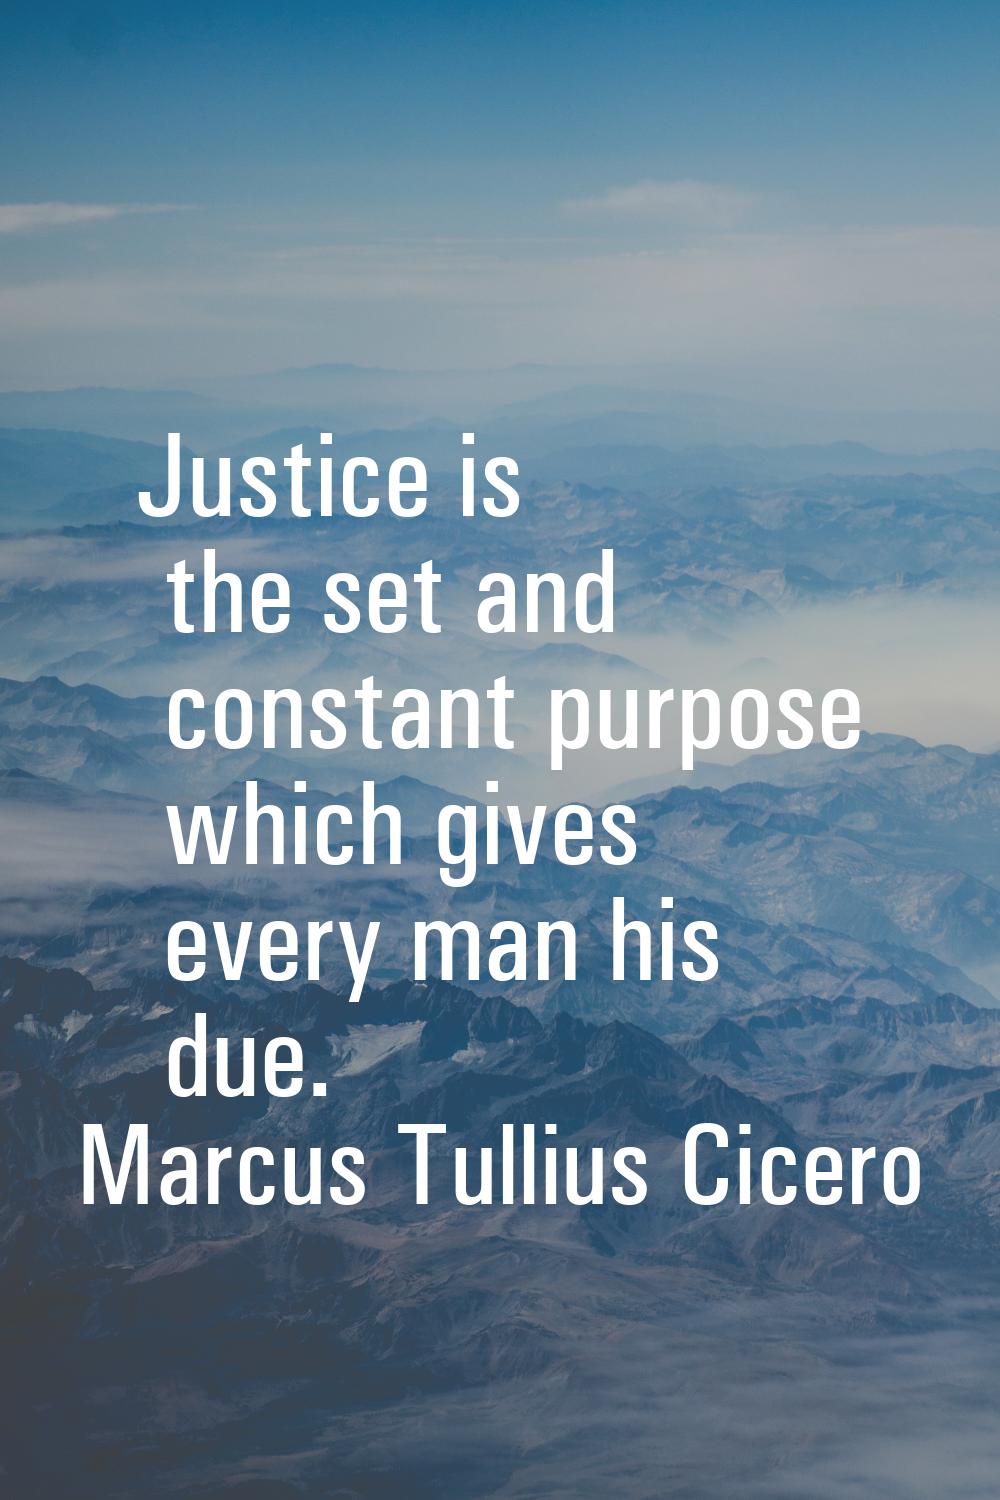 Justice is the set and constant purpose which gives every man his due.